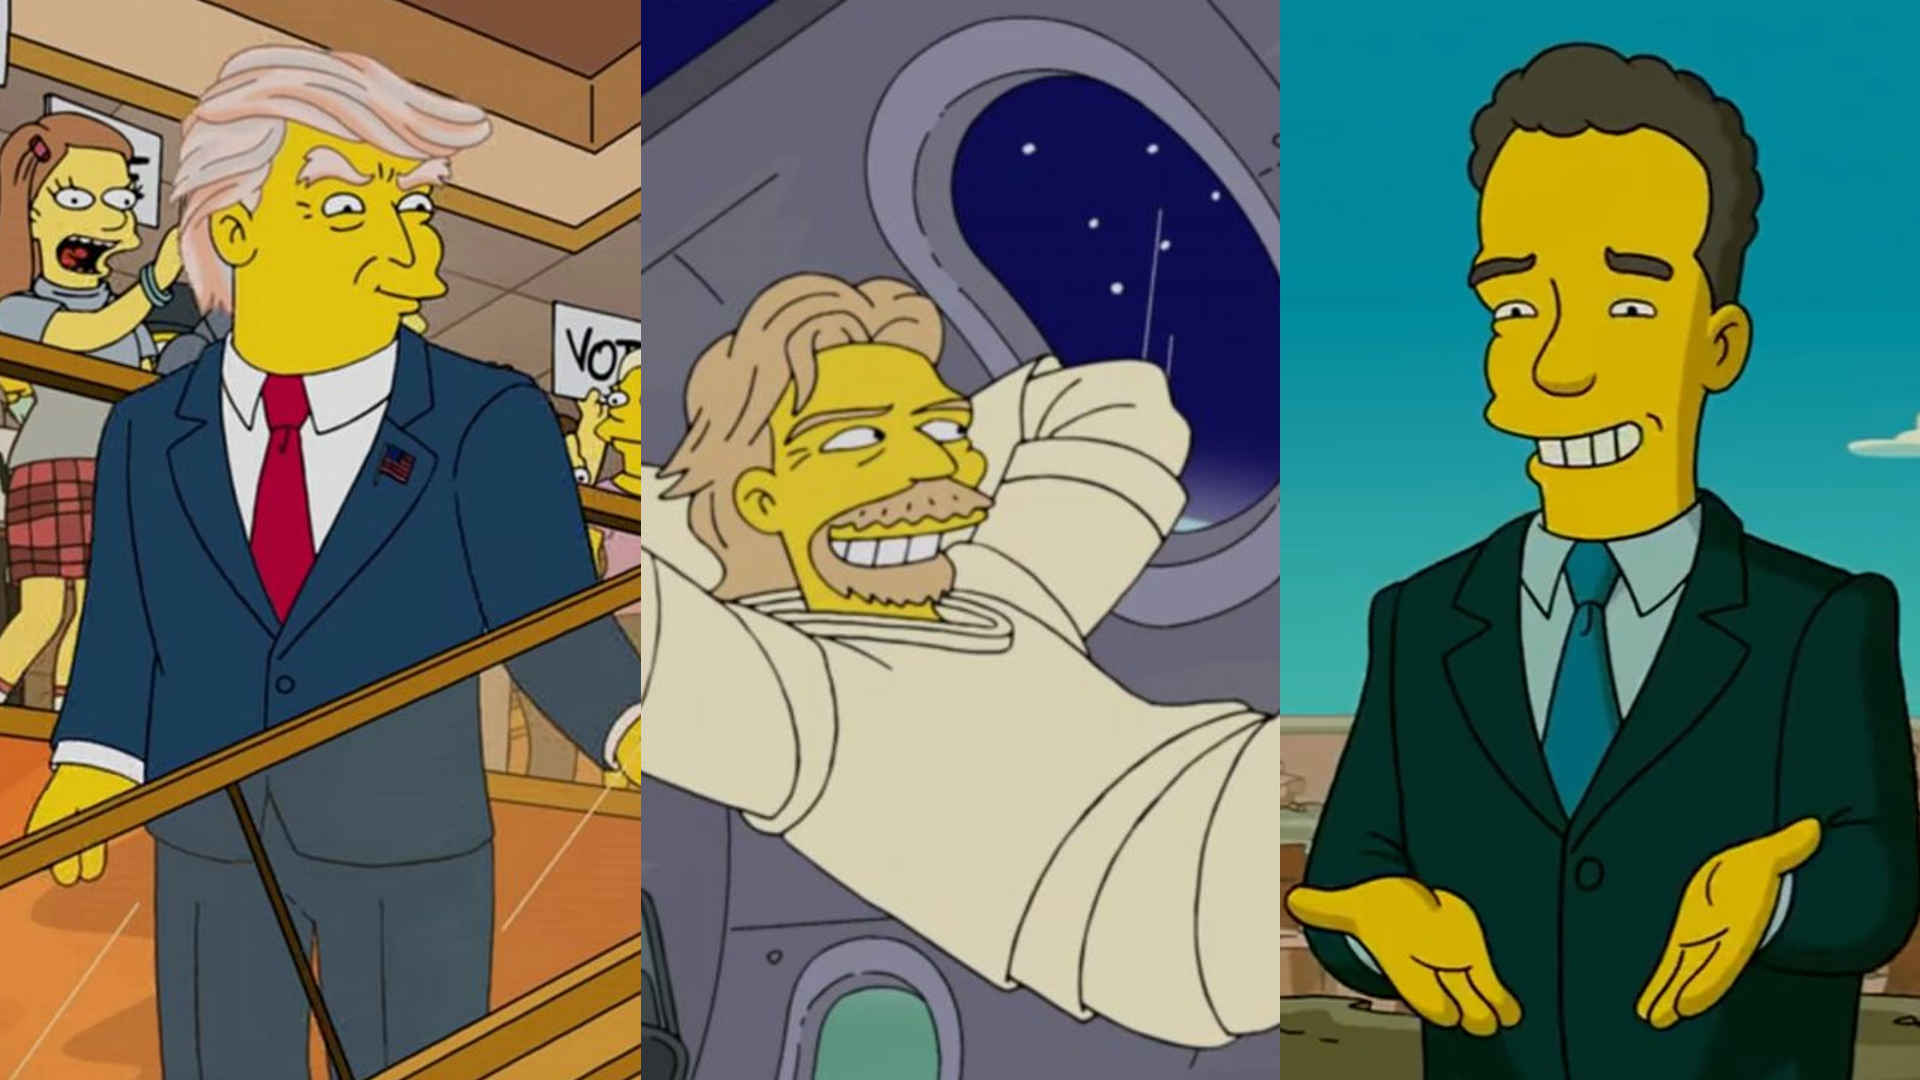 The Simpsons Predictions: How Do They Keep Getting It Right?